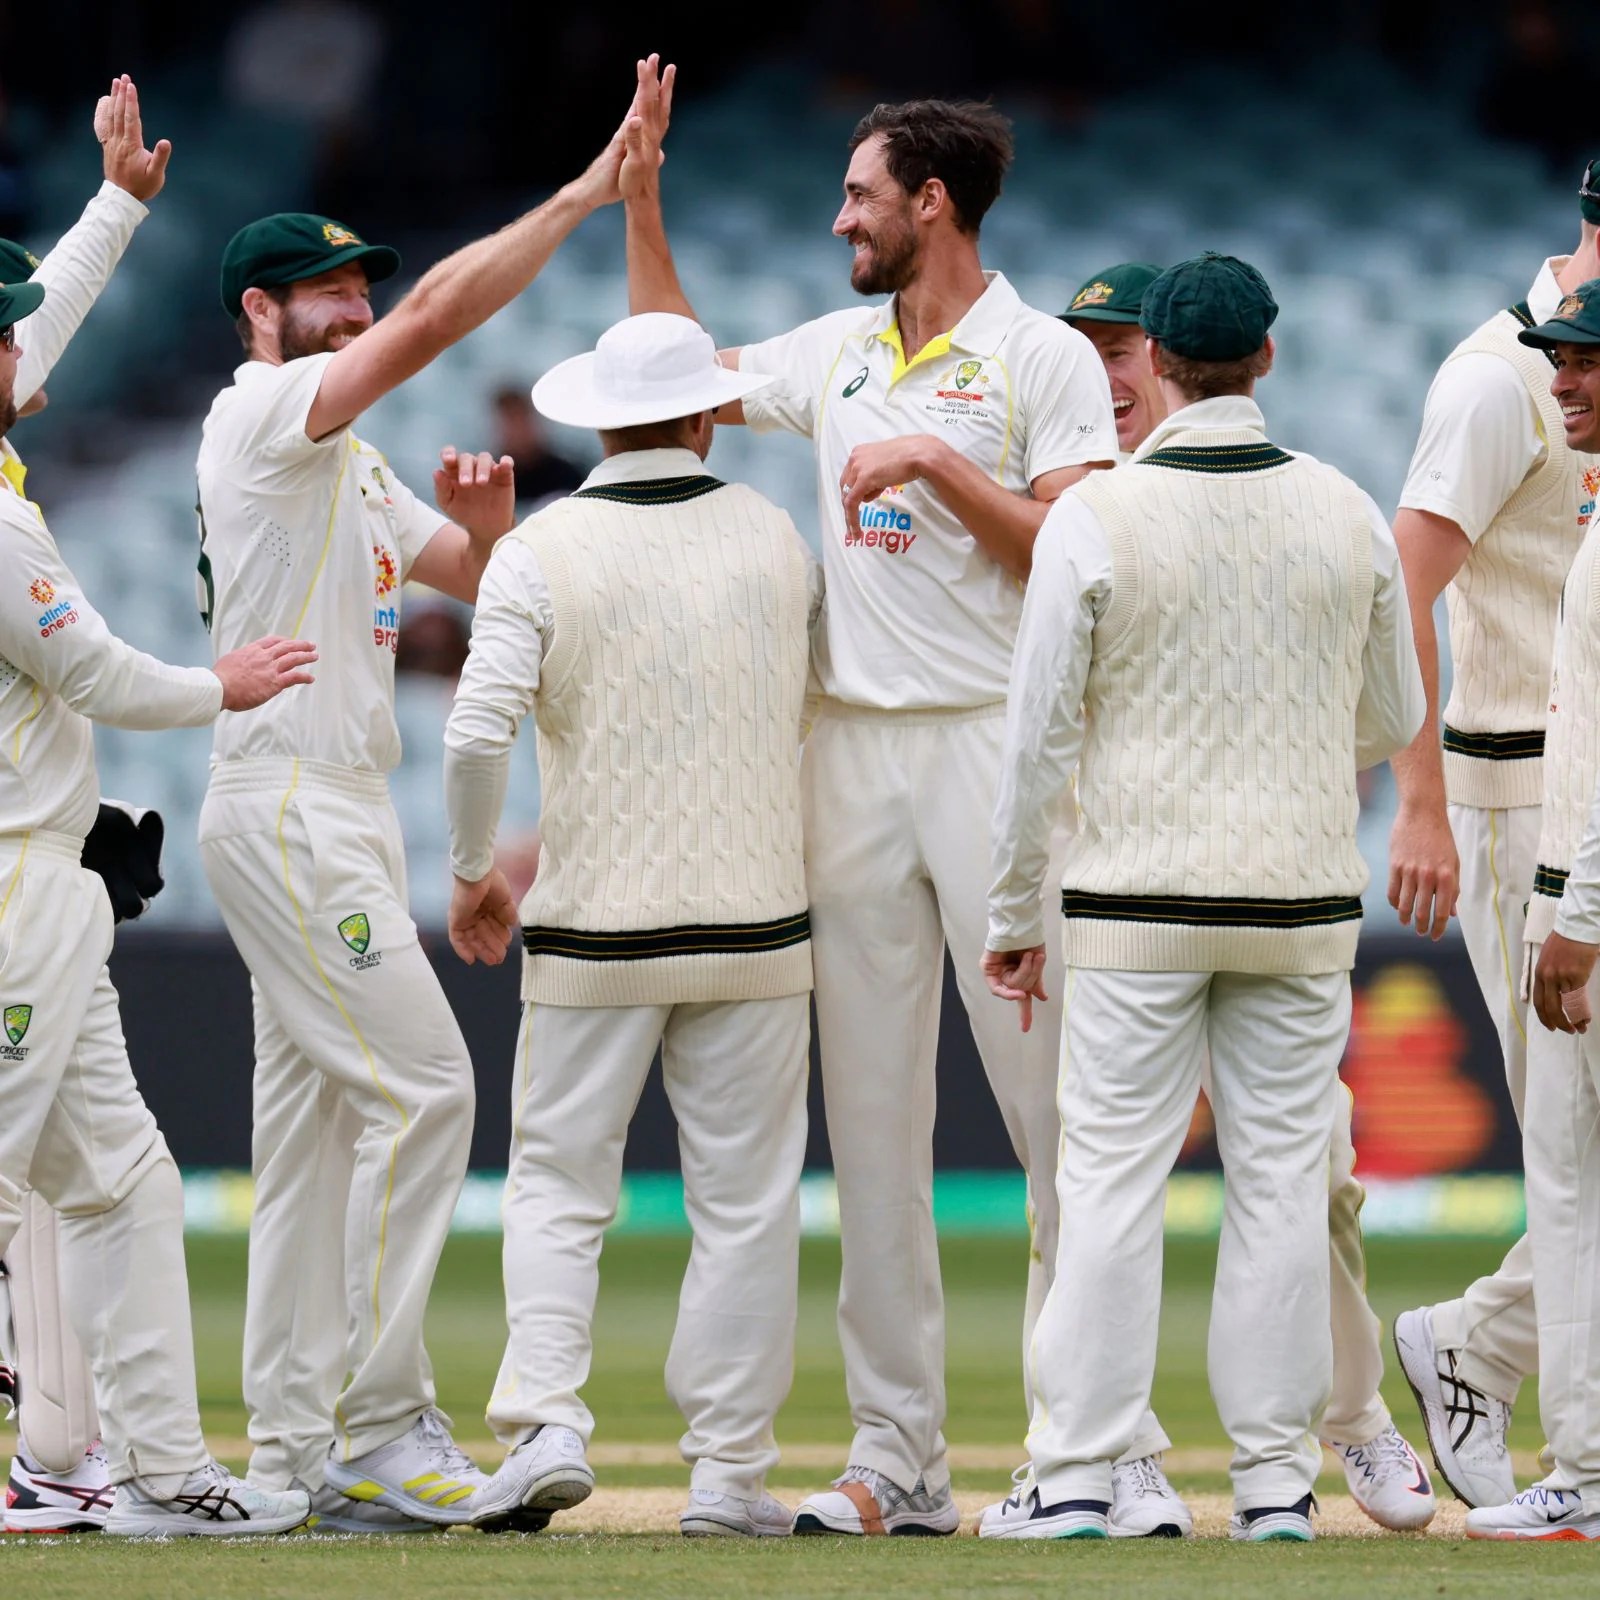 Aus vs SA: Proteas skipper Dean Elgar ENQUIRES about how UNSAFE was Brisbane Test wicket to UMPIRES post match, Australia beat SA by 9 wickets: Check details